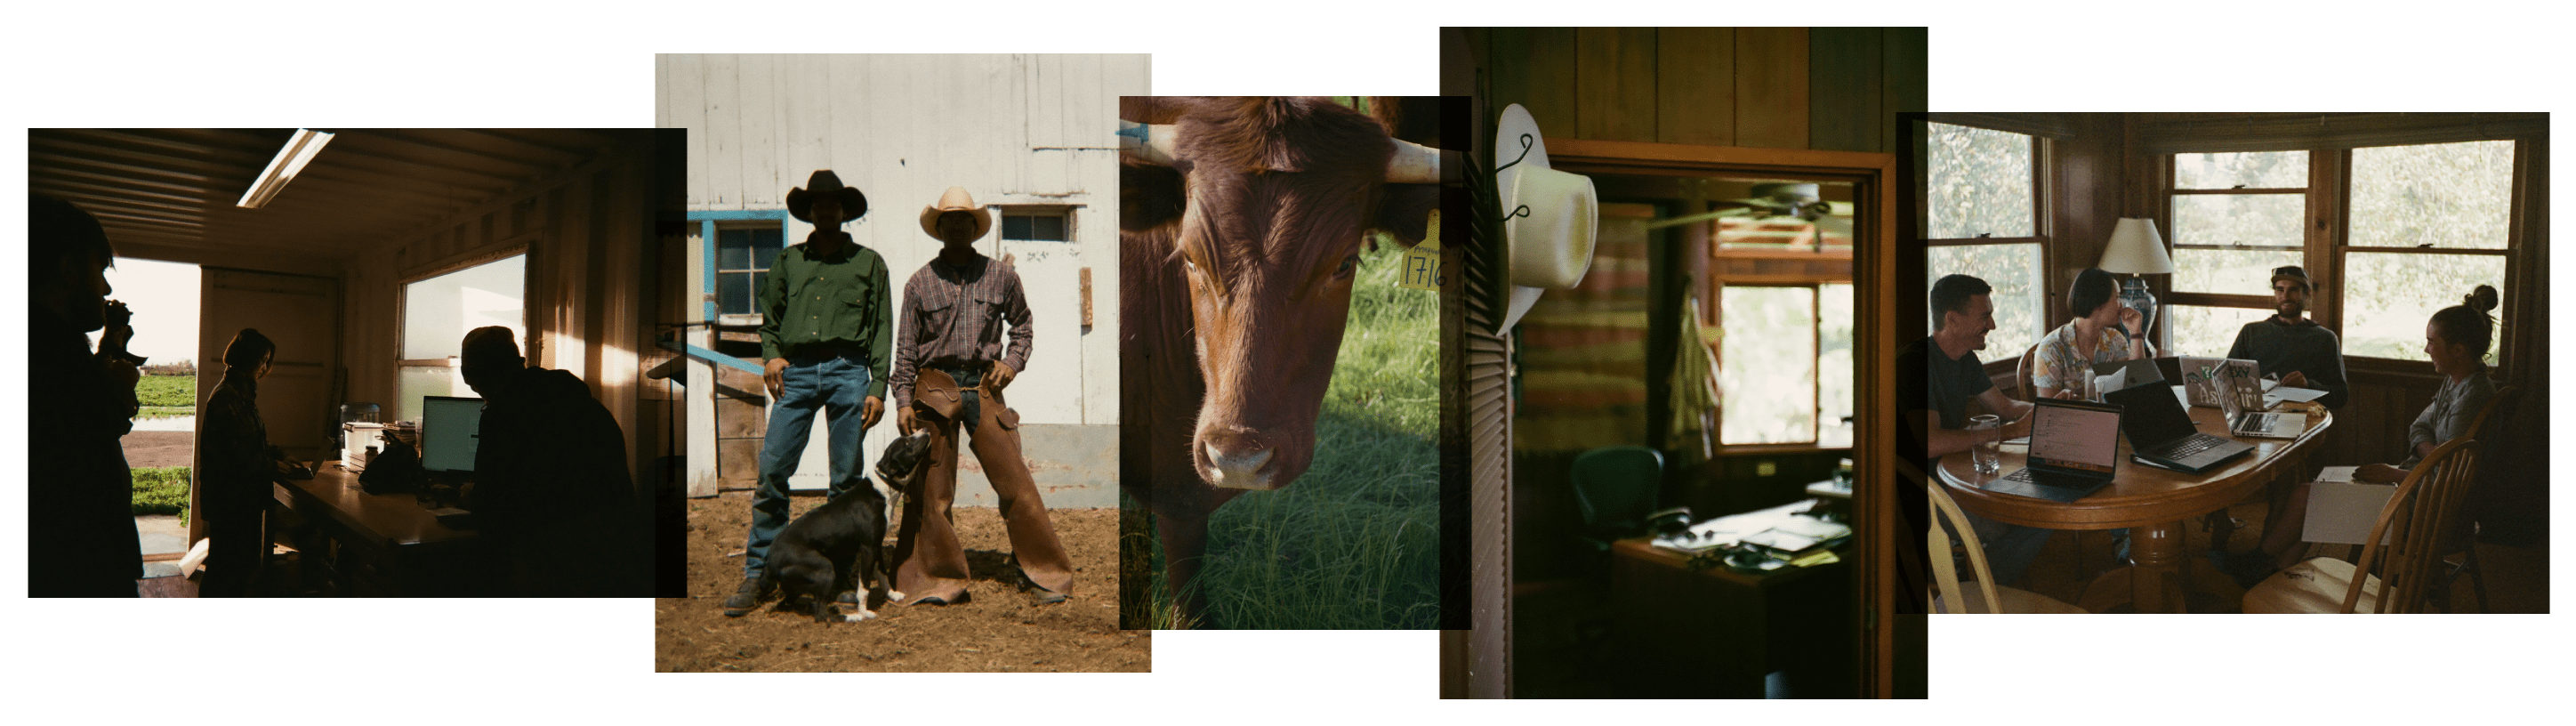 Imagery of farming and ranching.